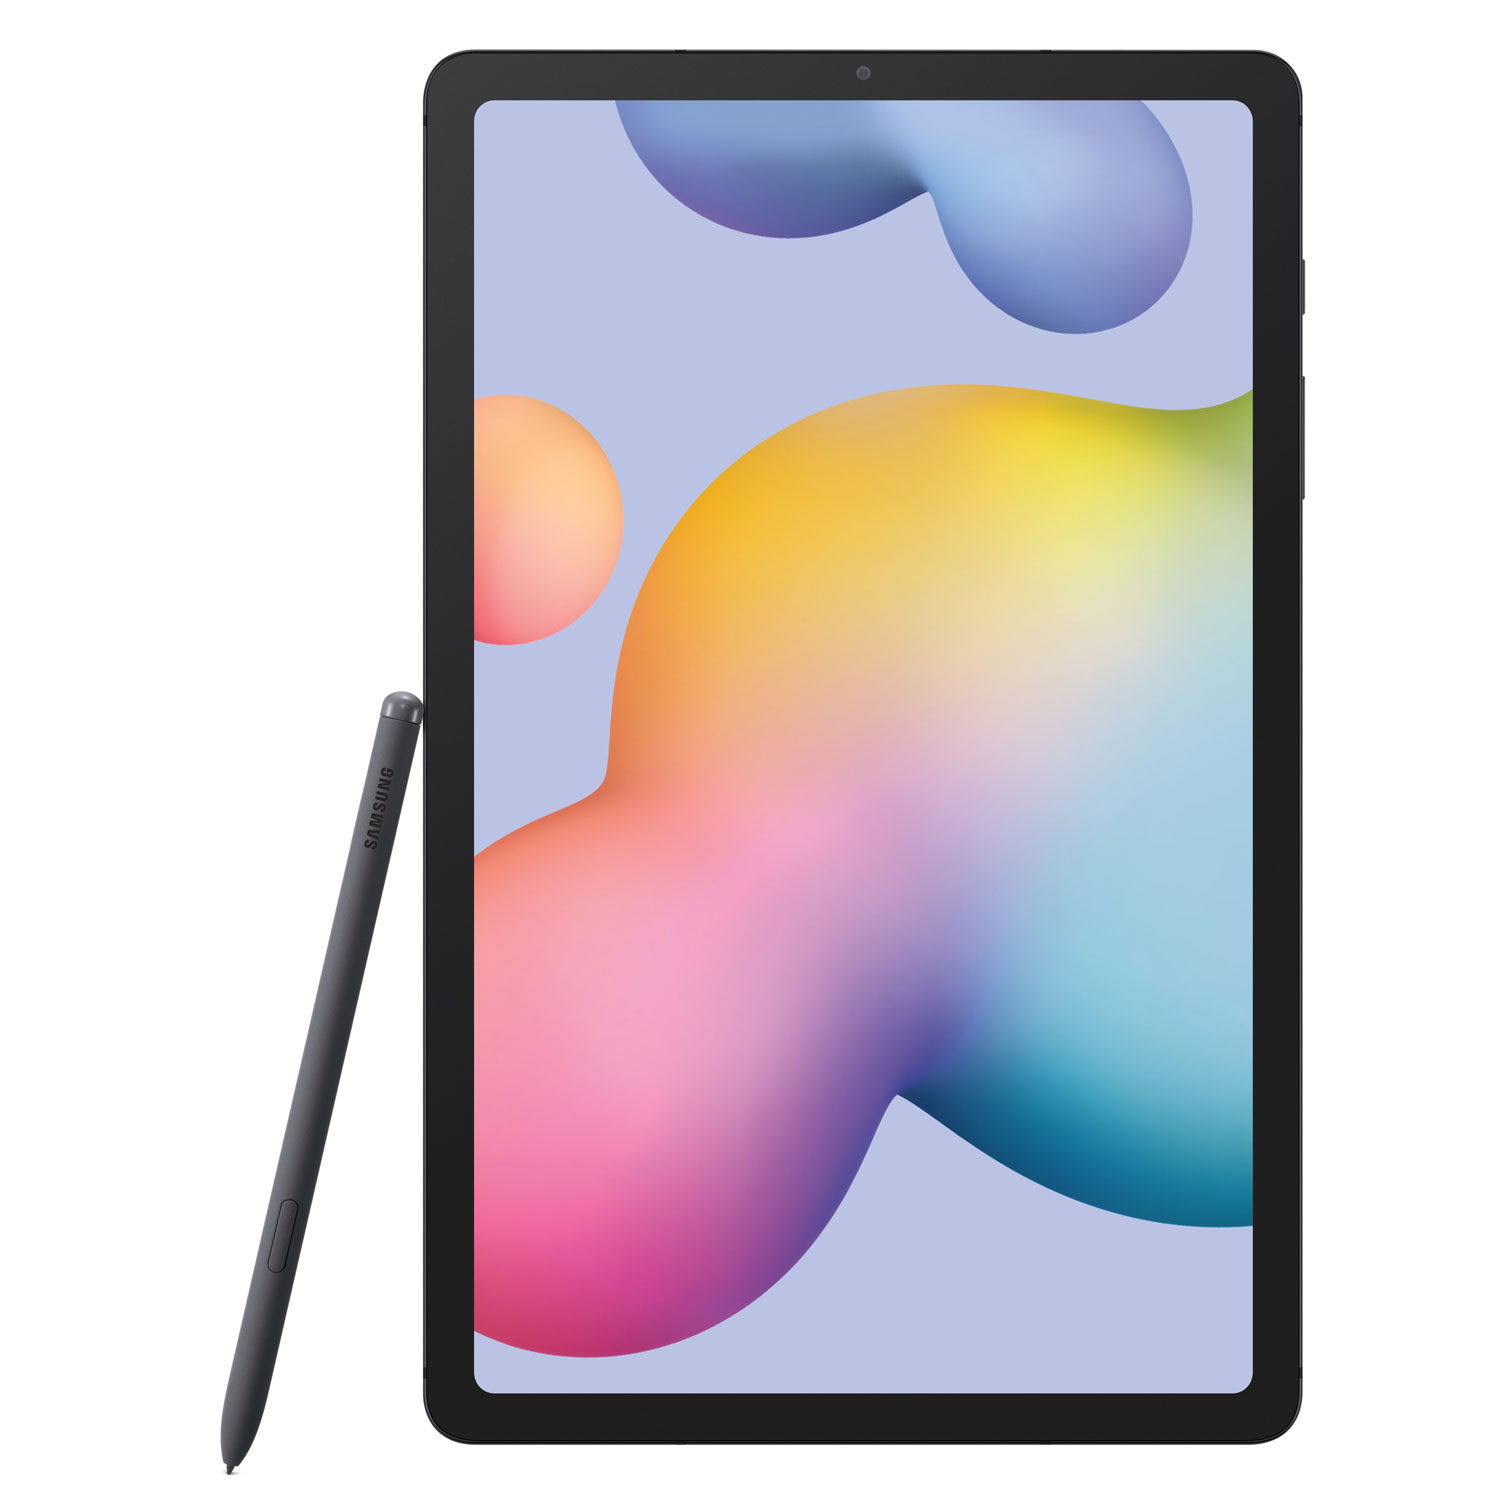 Samsung Galaxy Tab S6 Lite 10.4" 64GB Android Tablet with Exynos 9611 8-Core Processor - Oxford Grey